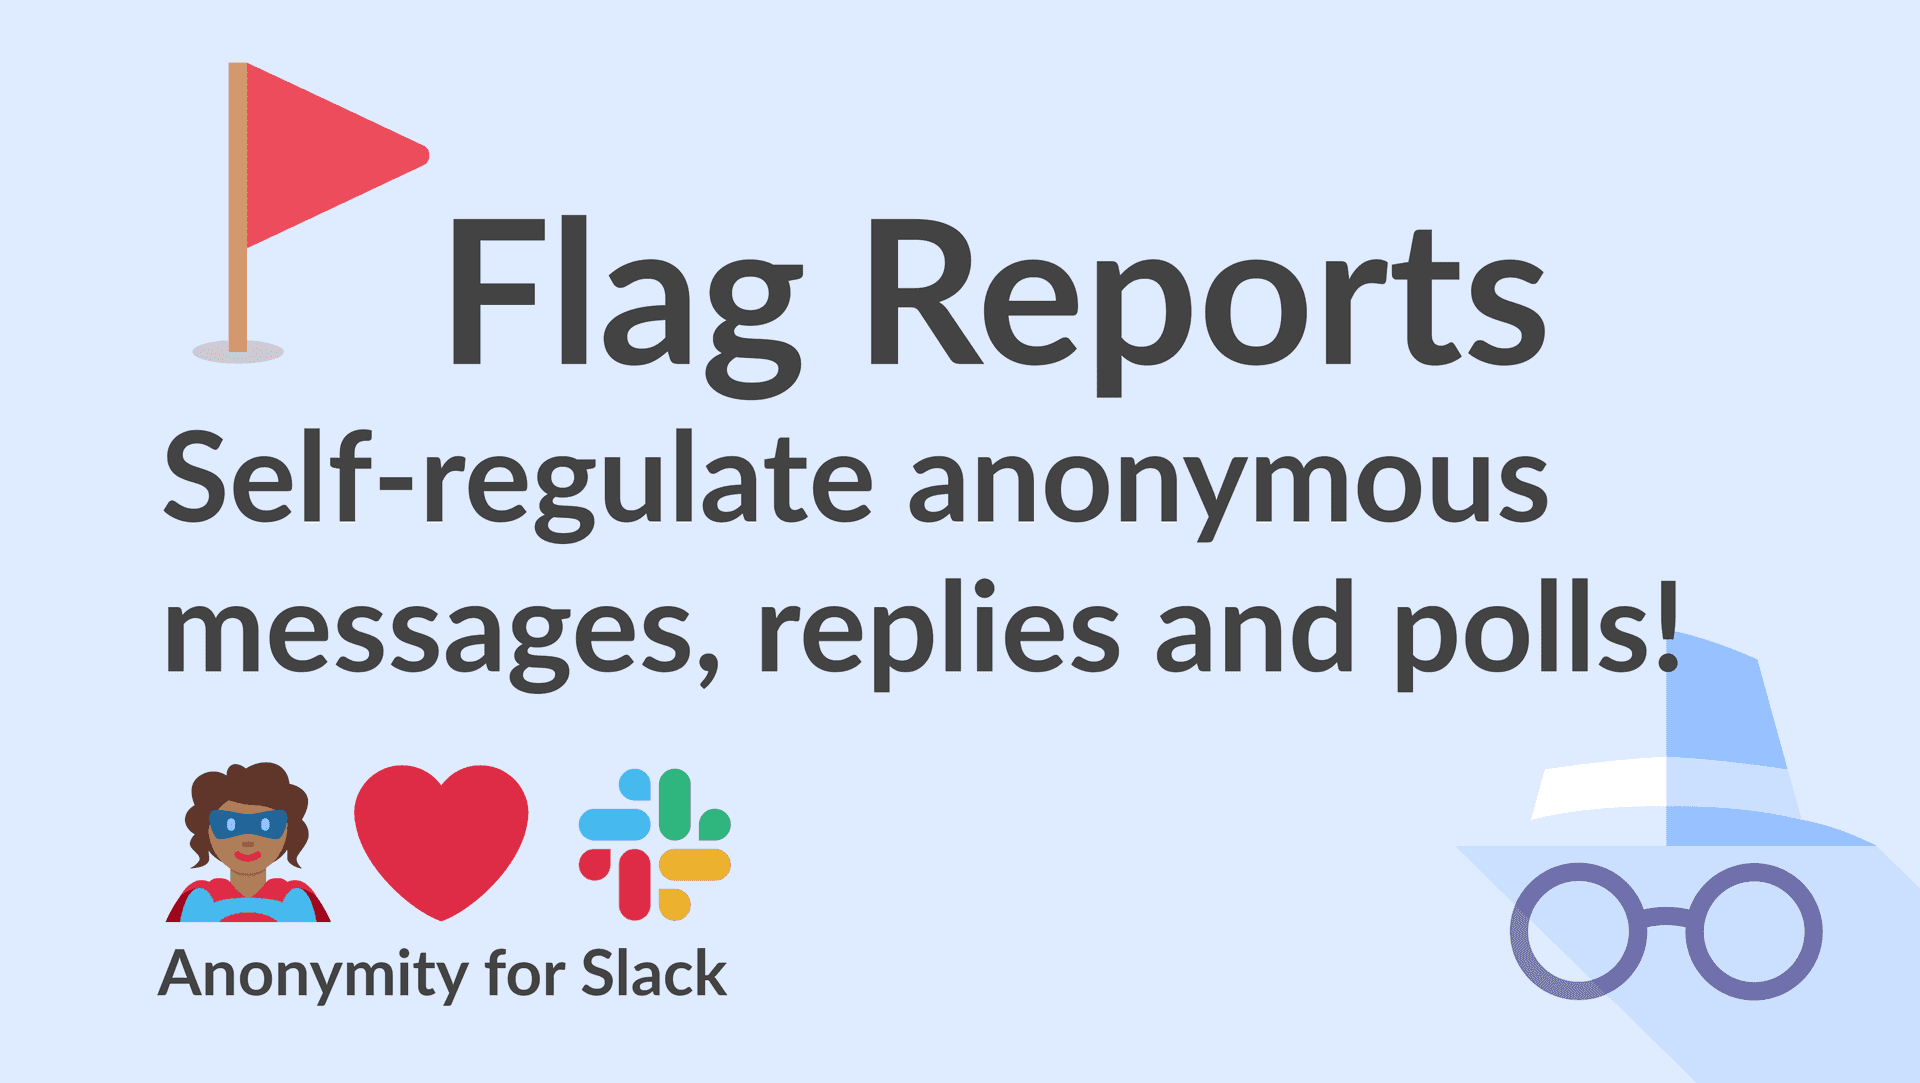 Flag Anonymous Messages as Inappropriate